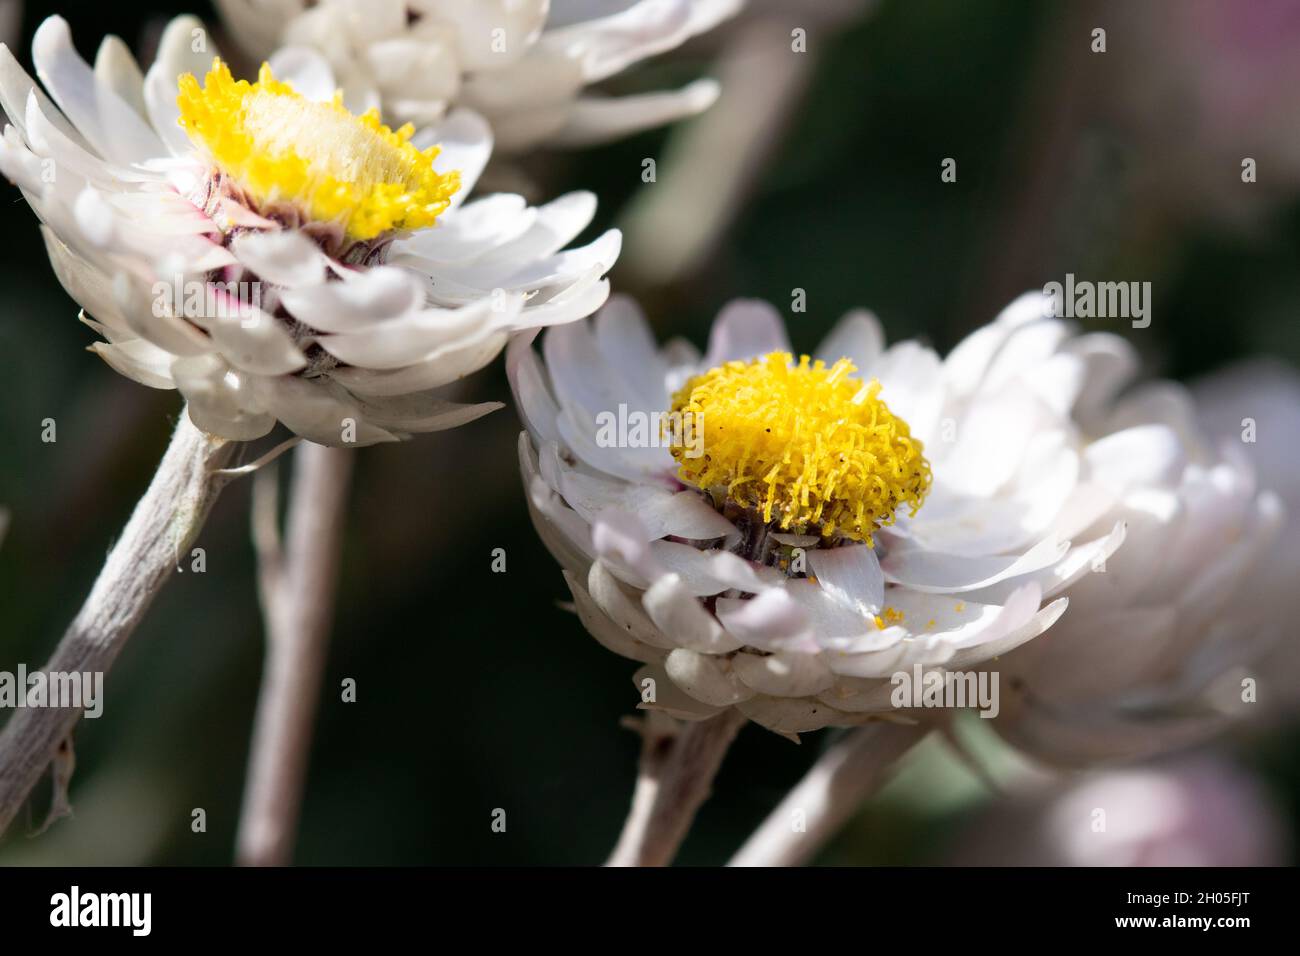 Beautiful, small white flowers found in Cape Town, South Africa. Stock Photo